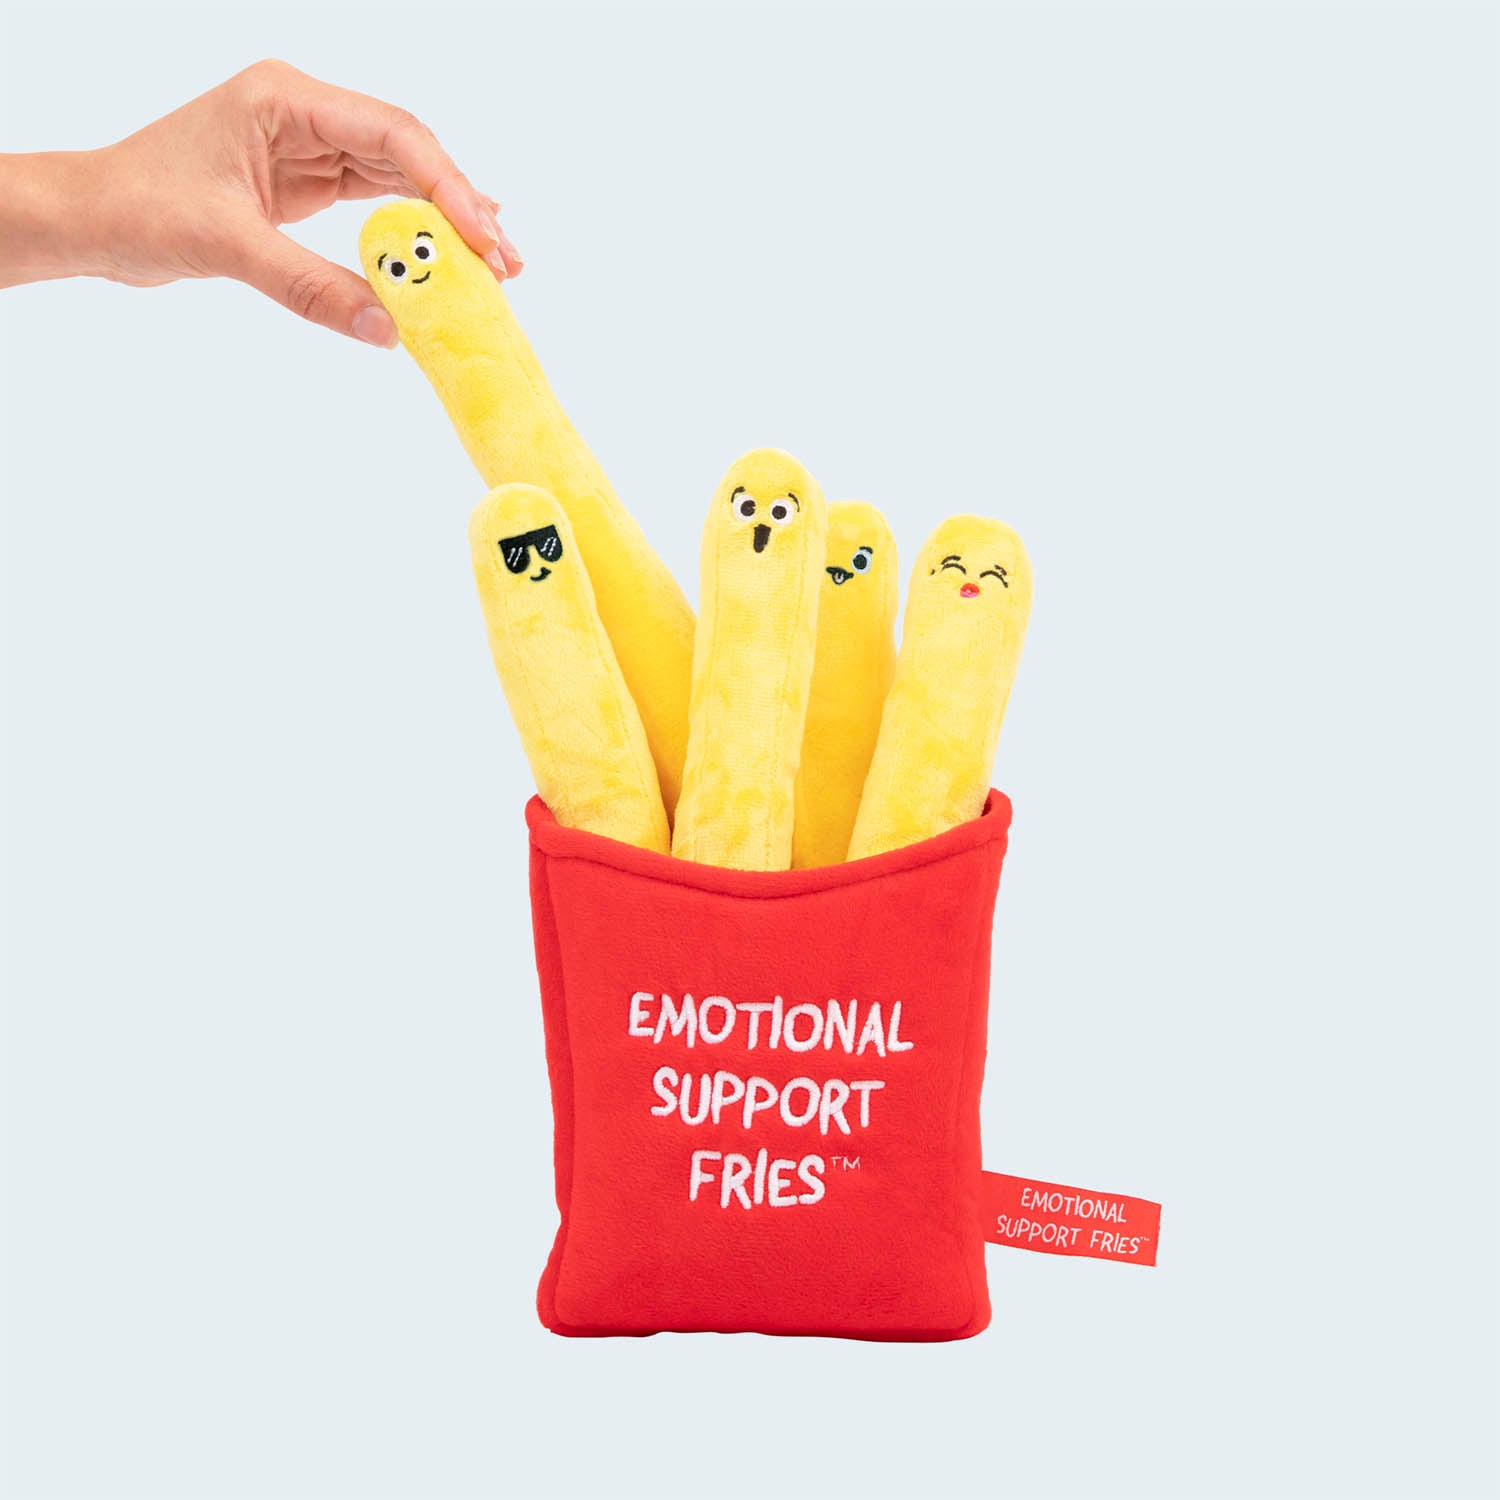 emotional-support-fries-game-box-and-game-play-05-what-do-you-meme-by-relatable